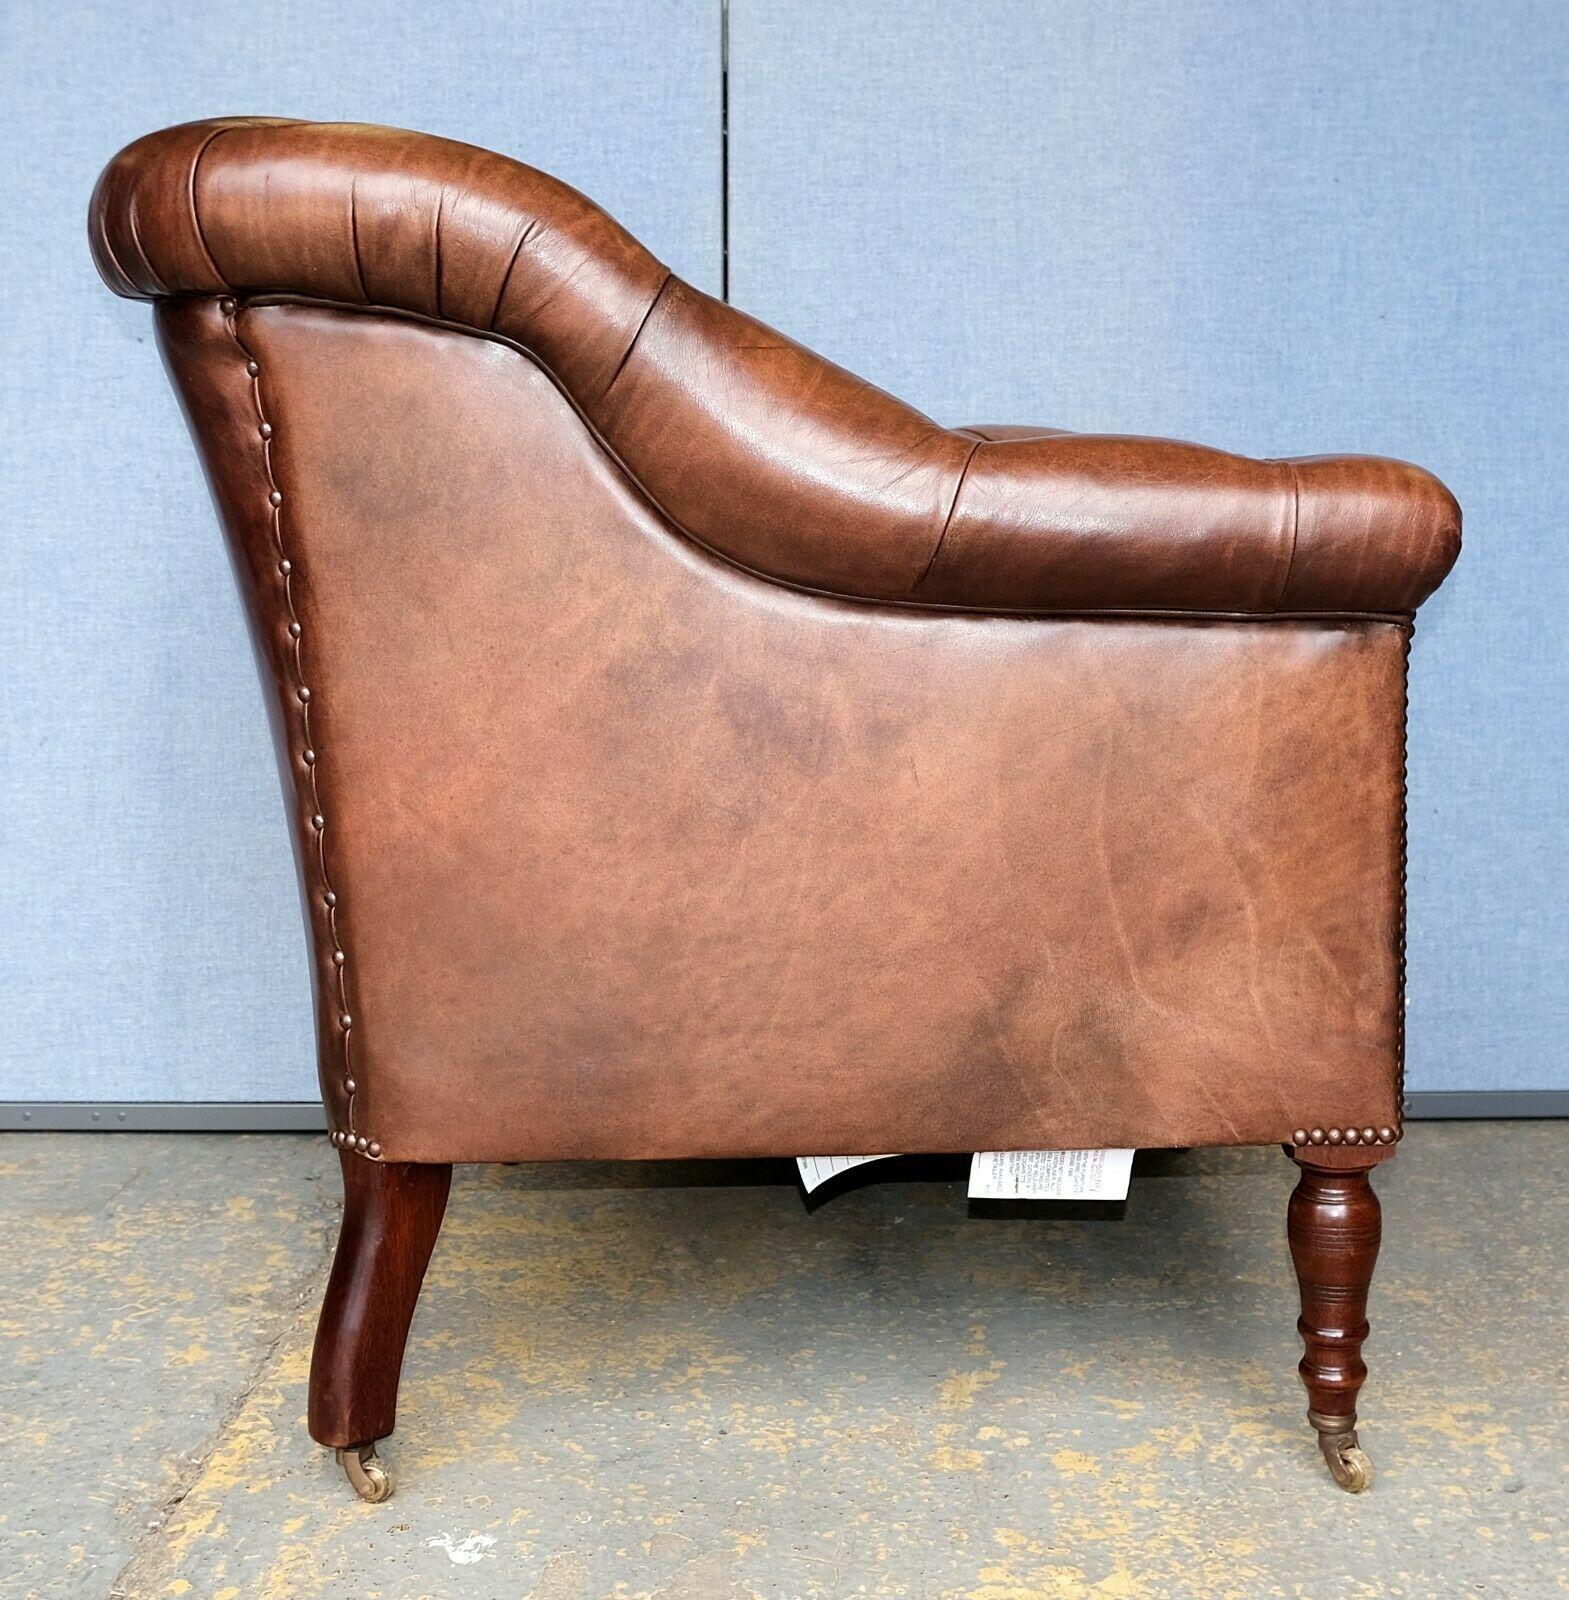 Georgeous Somerville George Smith Distress Brown Leather Chesterfield Armchair 1